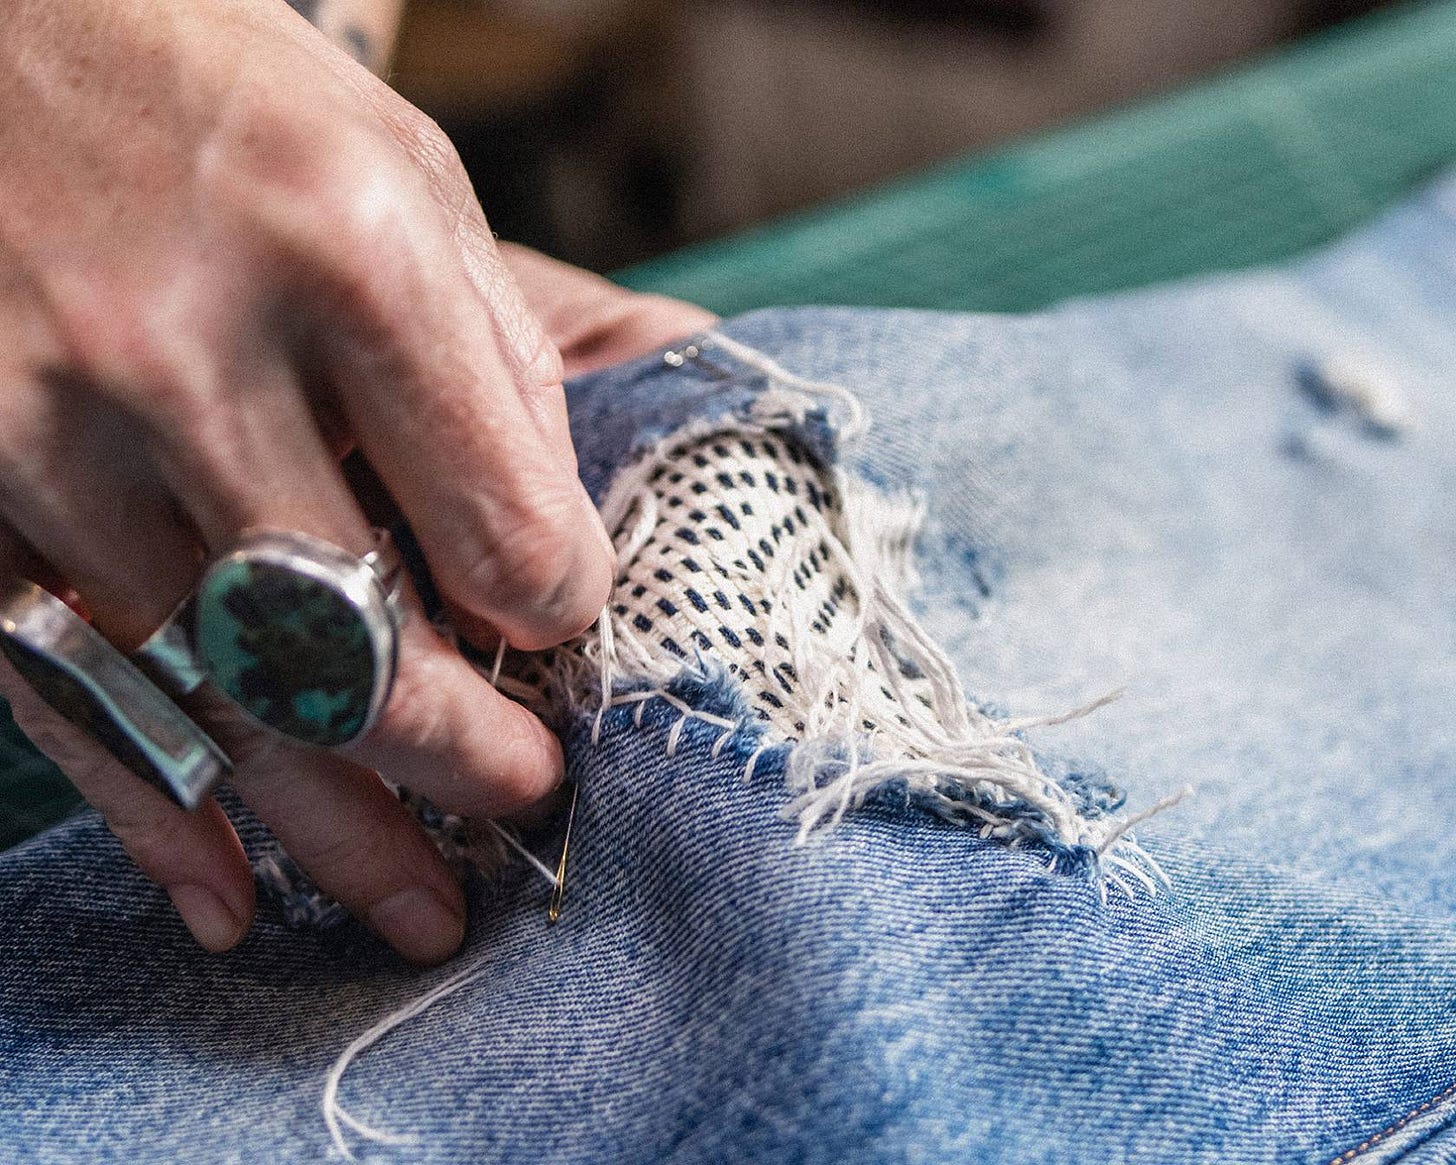 Person sewing together part of a jean.